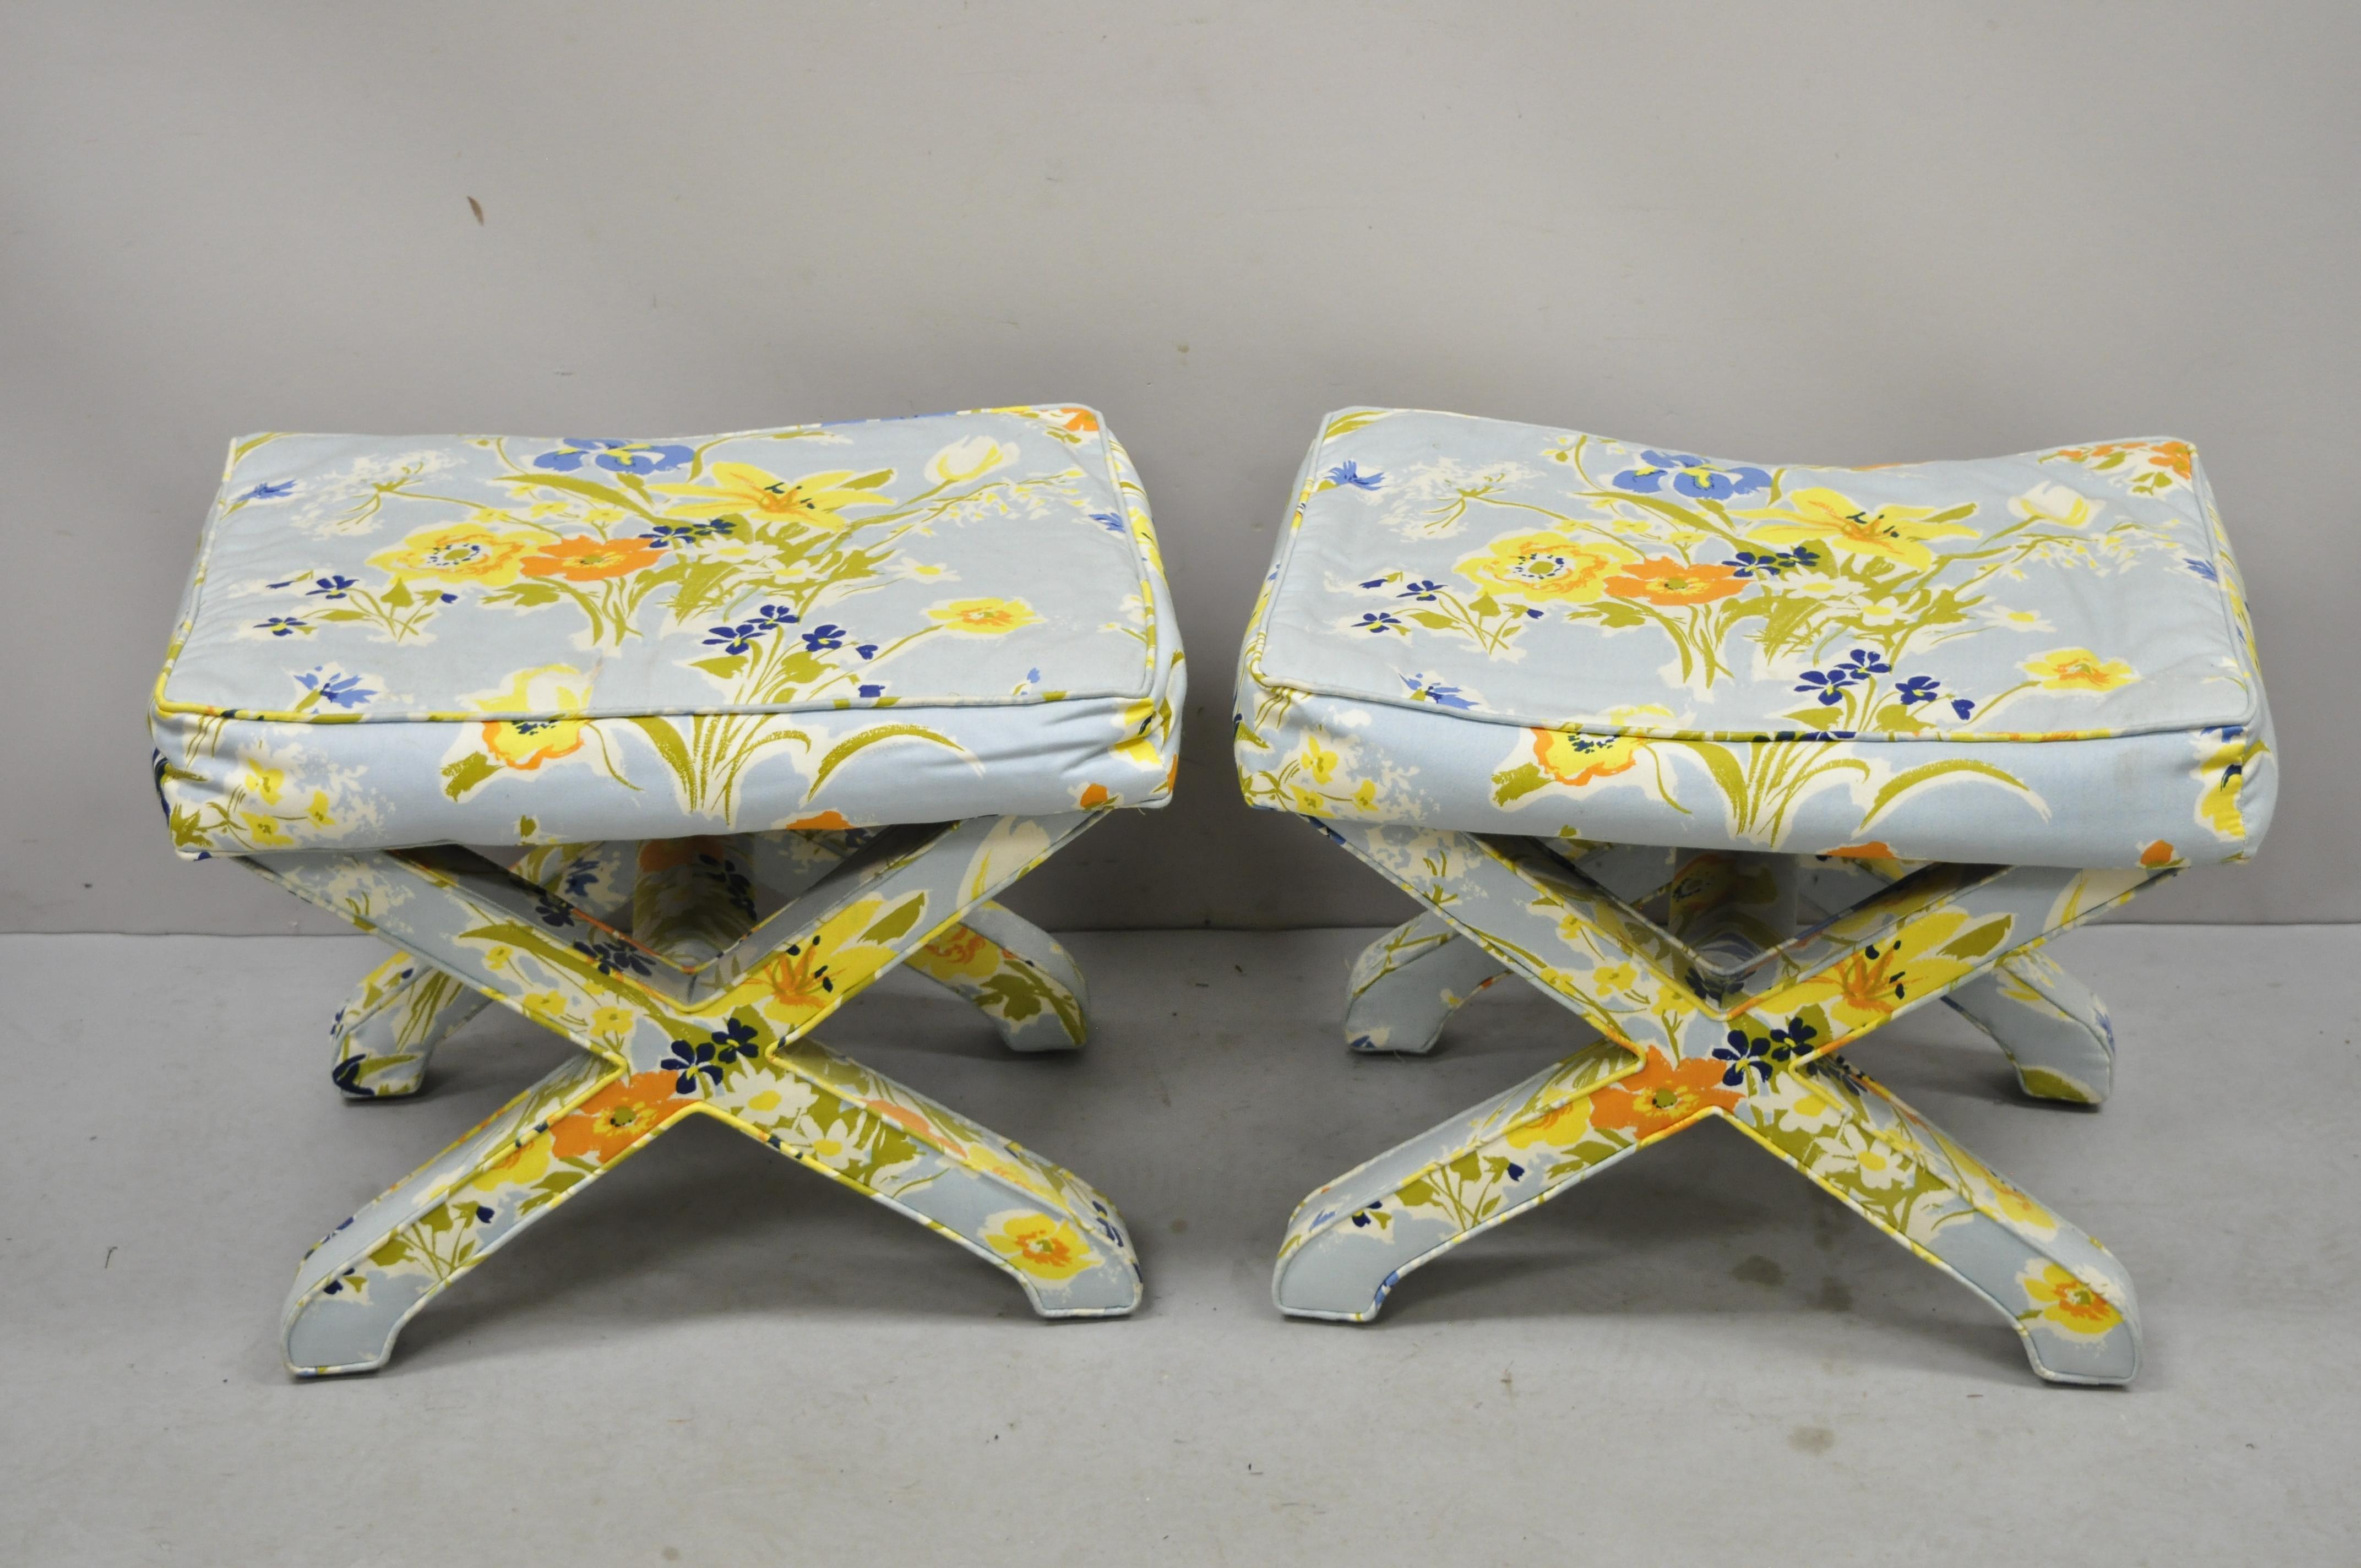 Vintage X-Form Hollywood Regency blue and orange floral print stools - a pair. Item features original blue and orange floral print, fully upholstered frames, very nice vintage pair, clean modernist lines, great style and form. Circa 1960s.